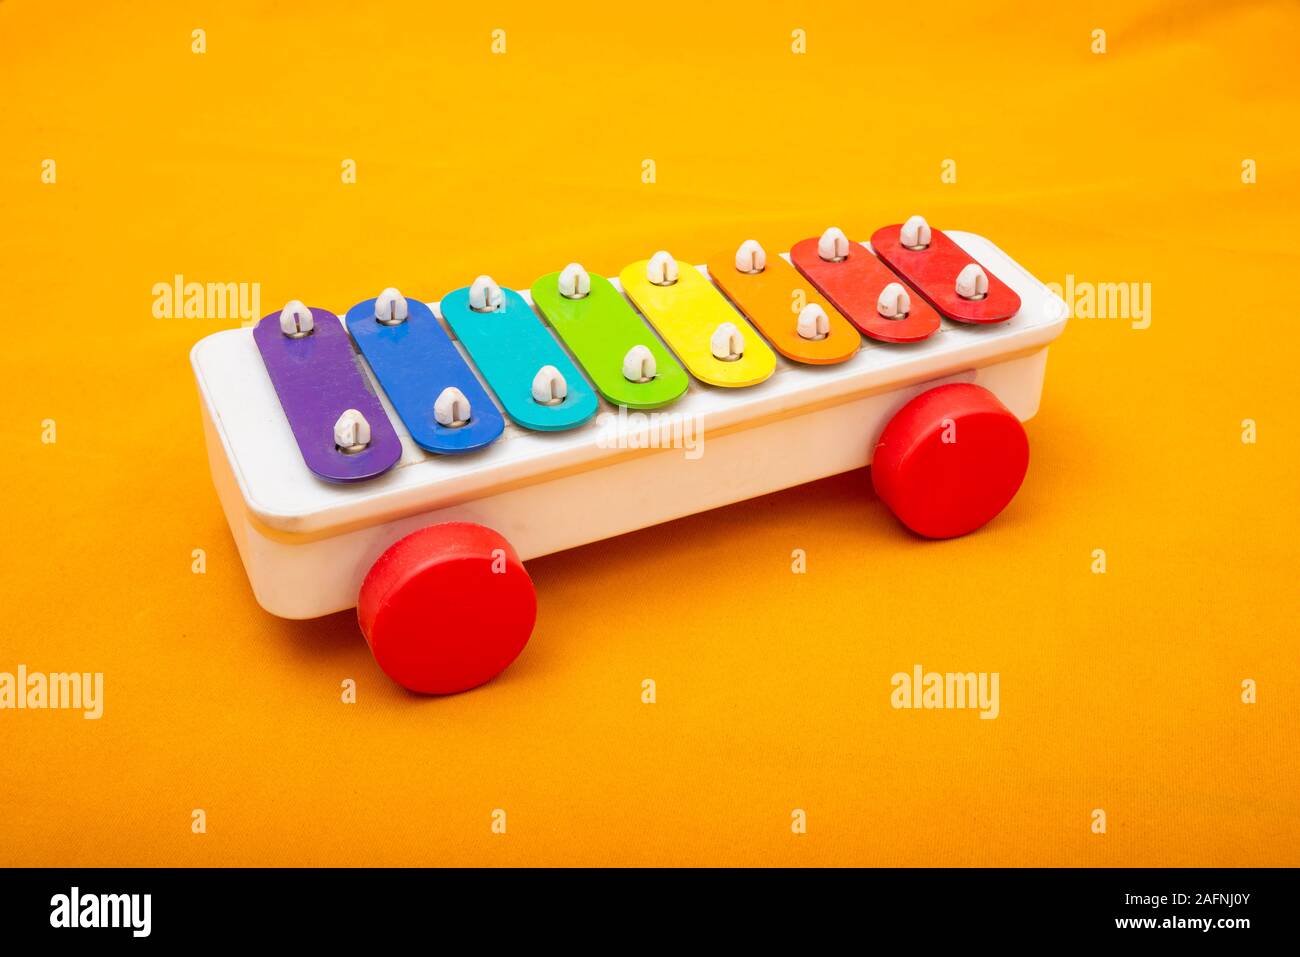 Close up color full glockenspiel xylophone on yellow background, musical concept Stock Photo